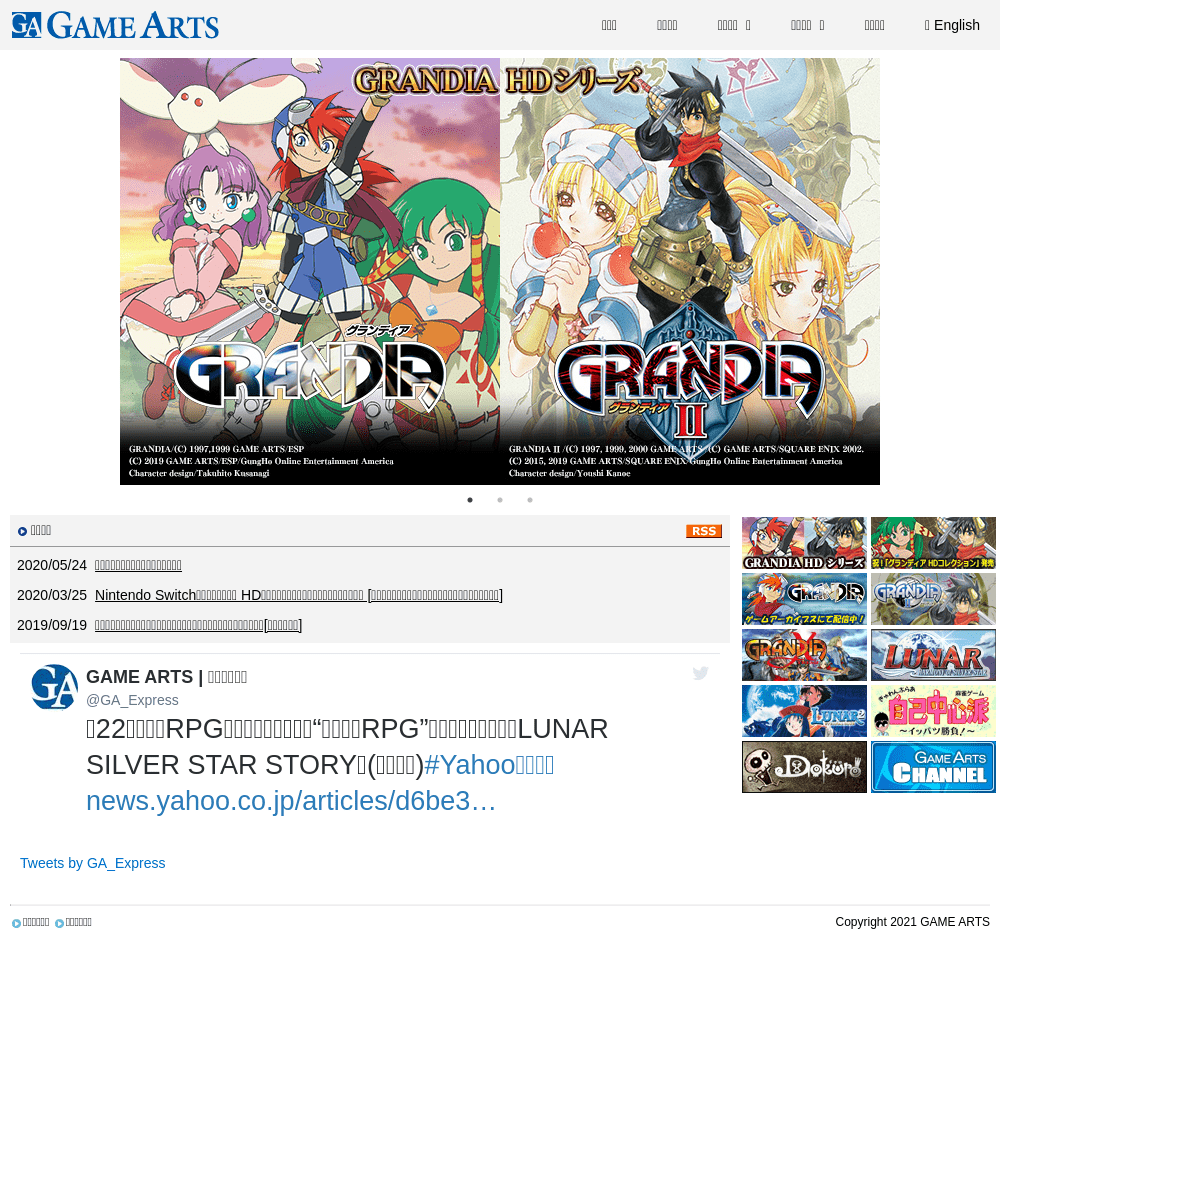 A complete backup of https://gamearts.co.jp